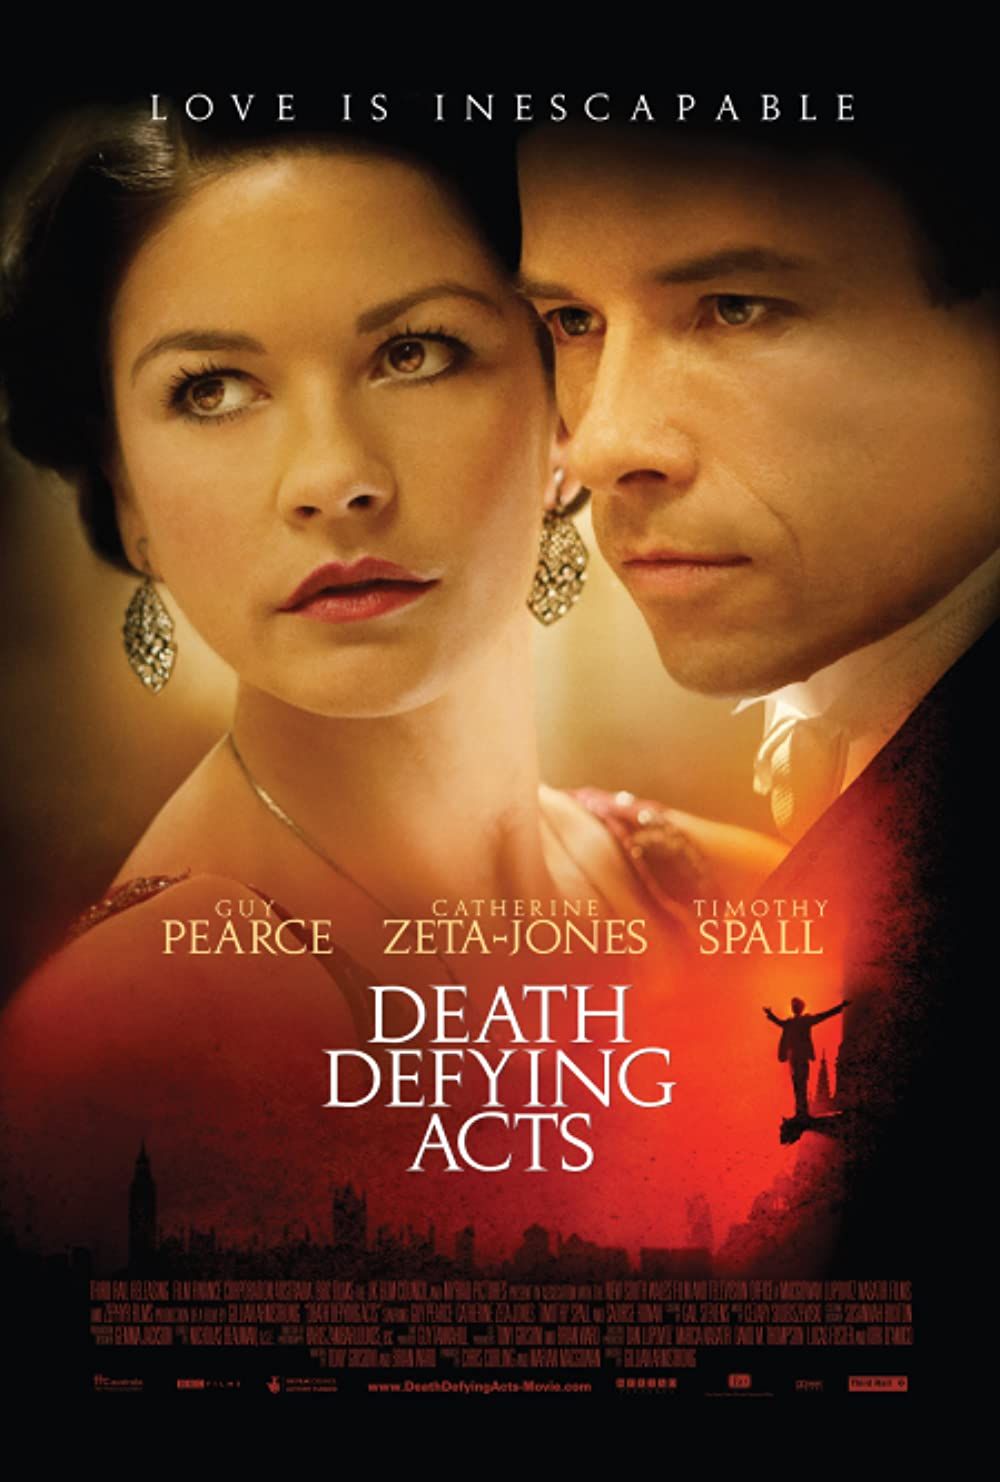 Death Defying Acts (2007) Hindi Dubbed BluRay download full movie